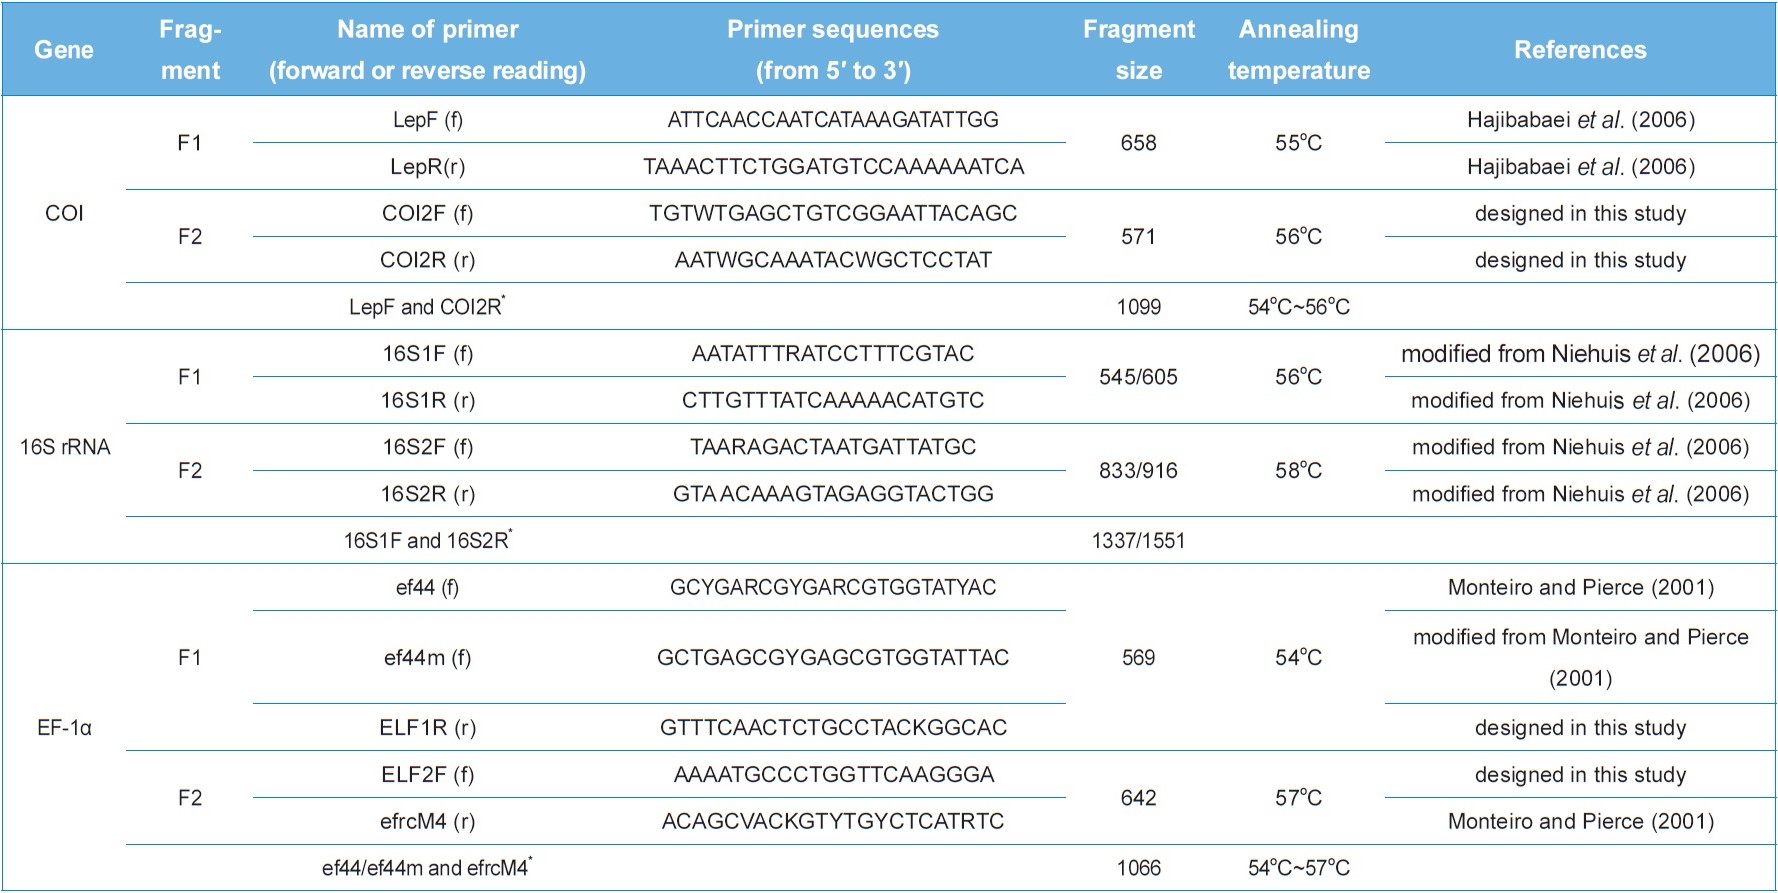 Primers used for the amplification of COI, 16S rRNA, and EF-1α genes